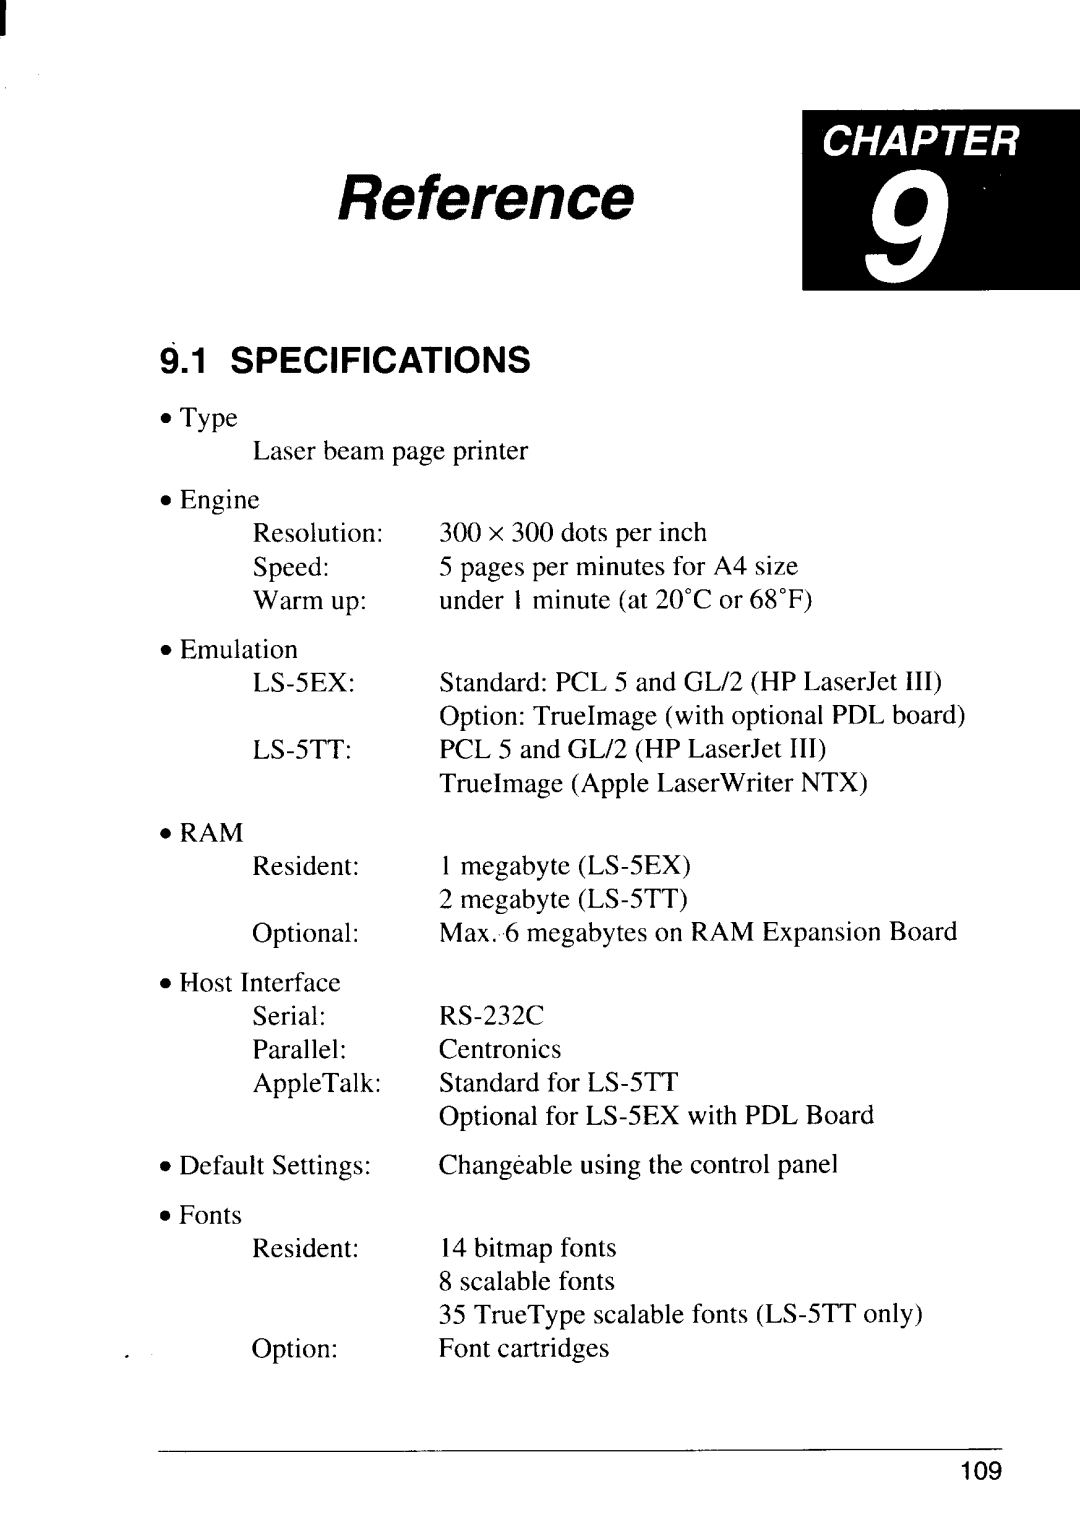 Star Micronics LS-5 TT, LS-5 EX operation manual Specifications, Reference 